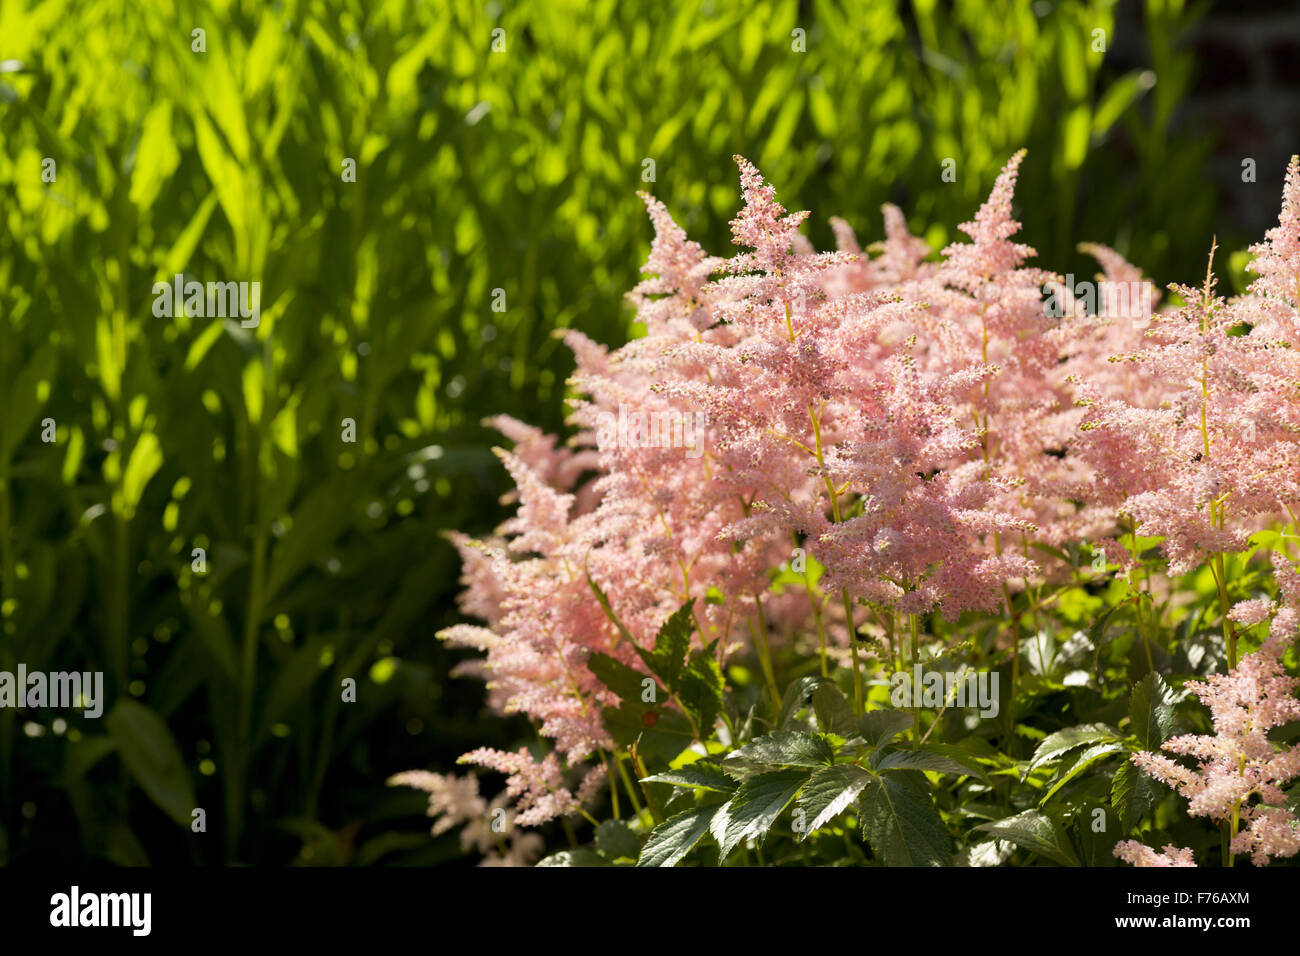 Pink Astilibe x arendsii commonly known as False Spirea or Hybrid Astilbe Stock Photo